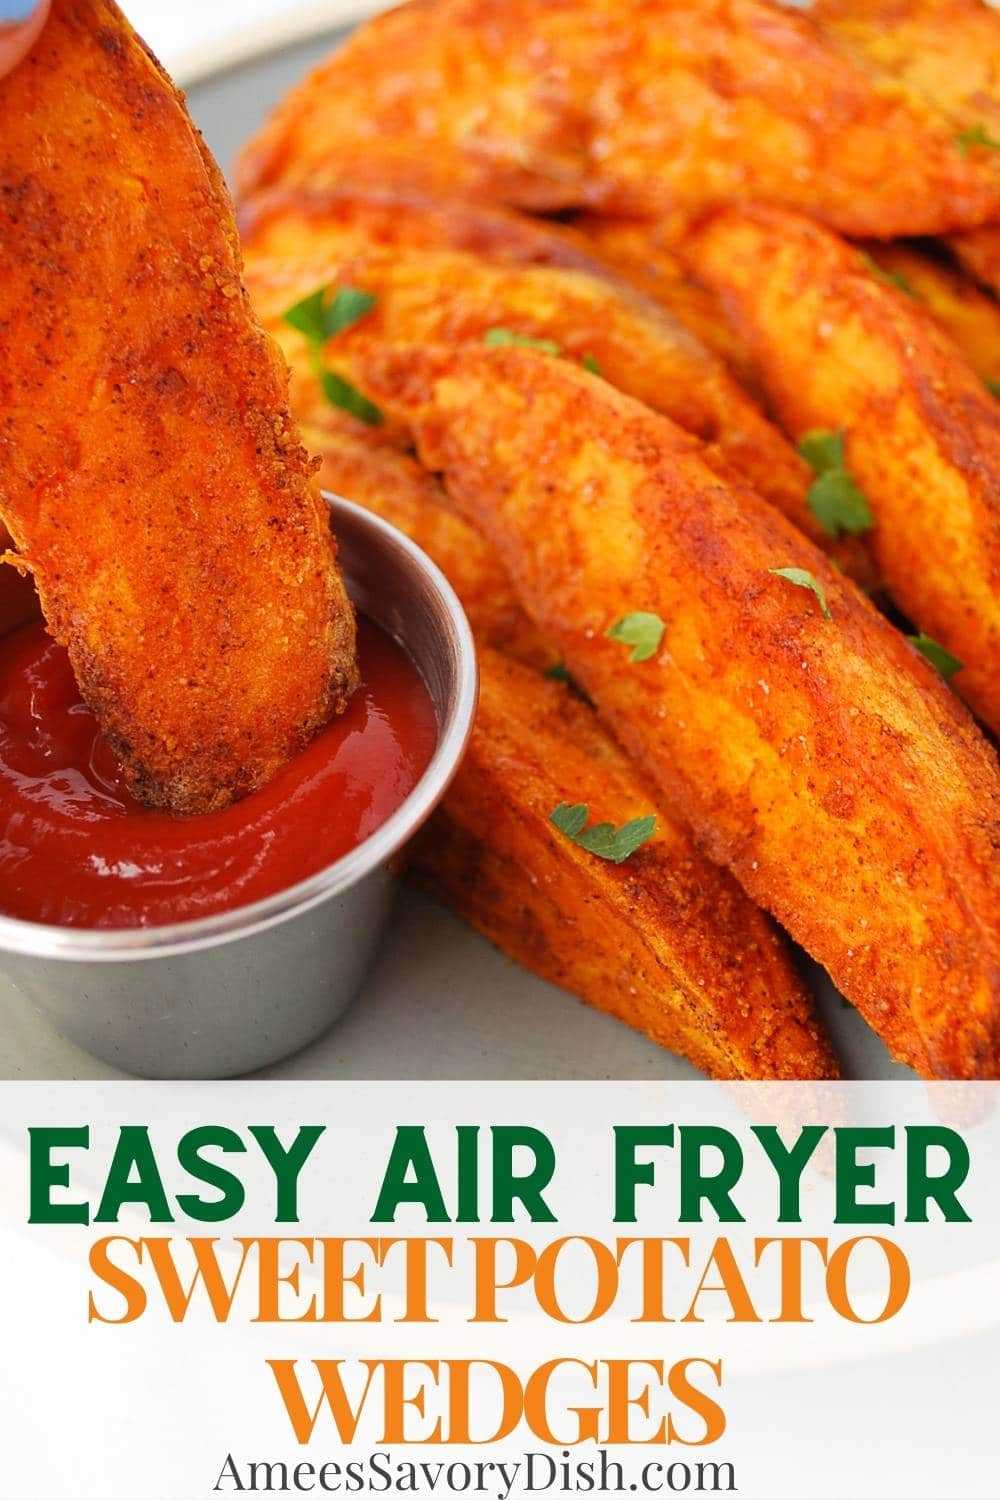 Make thick and crispy Air Fryer Sweet Potato Wedges in a cinch. These perfectly seasoned wedges are excellent when you need a simple and healthy appetizer, side dish, or snack the whole family will love. via @Ameessavorydish